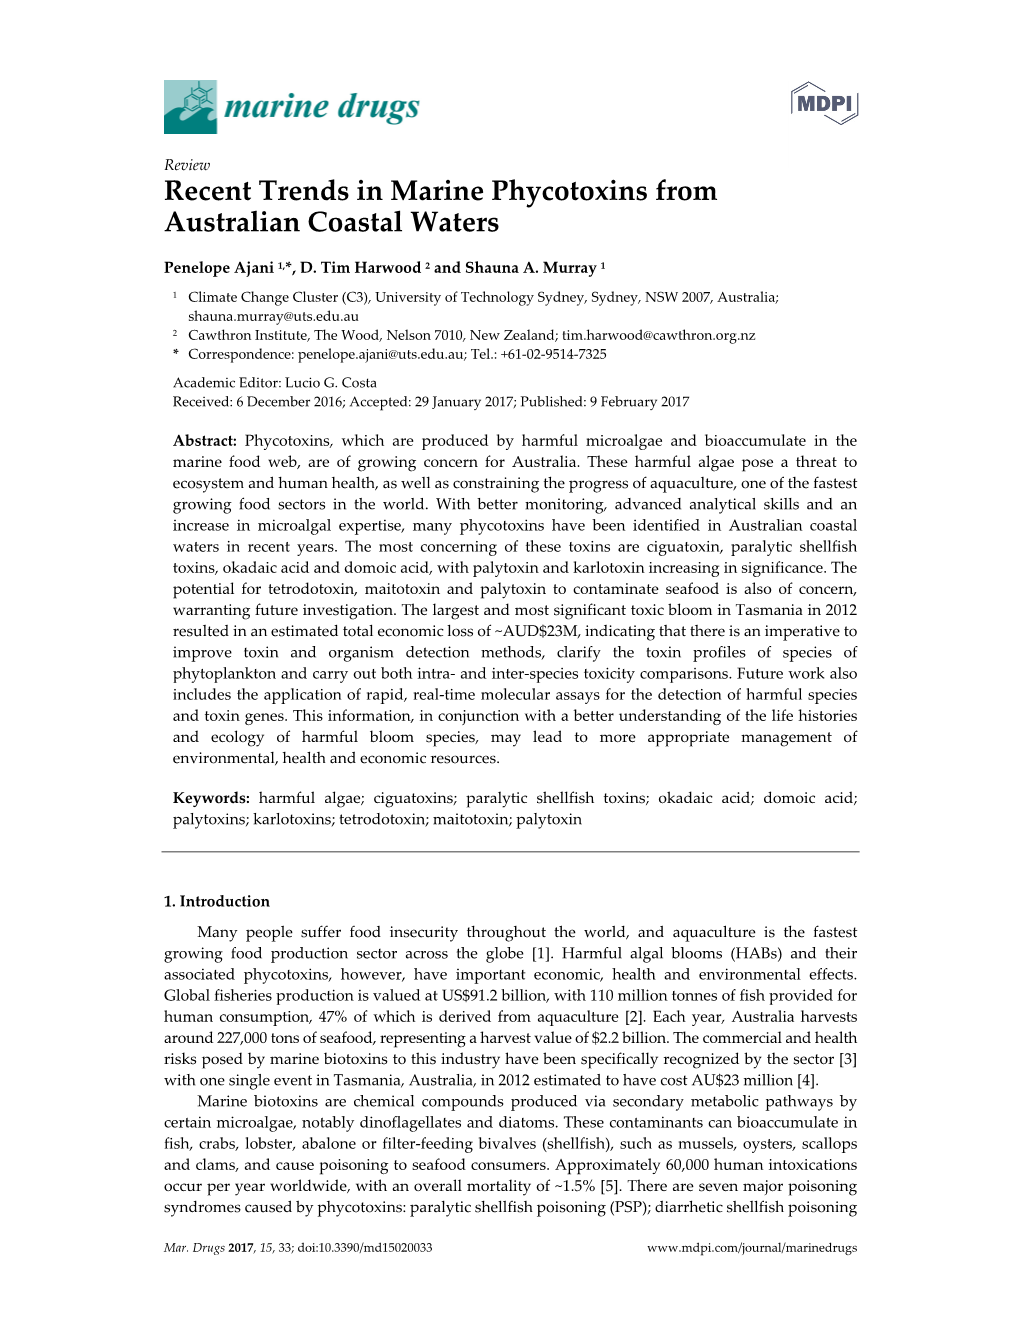 Recent Trends in Marine Phycotoxins from Australian Coastal Waters